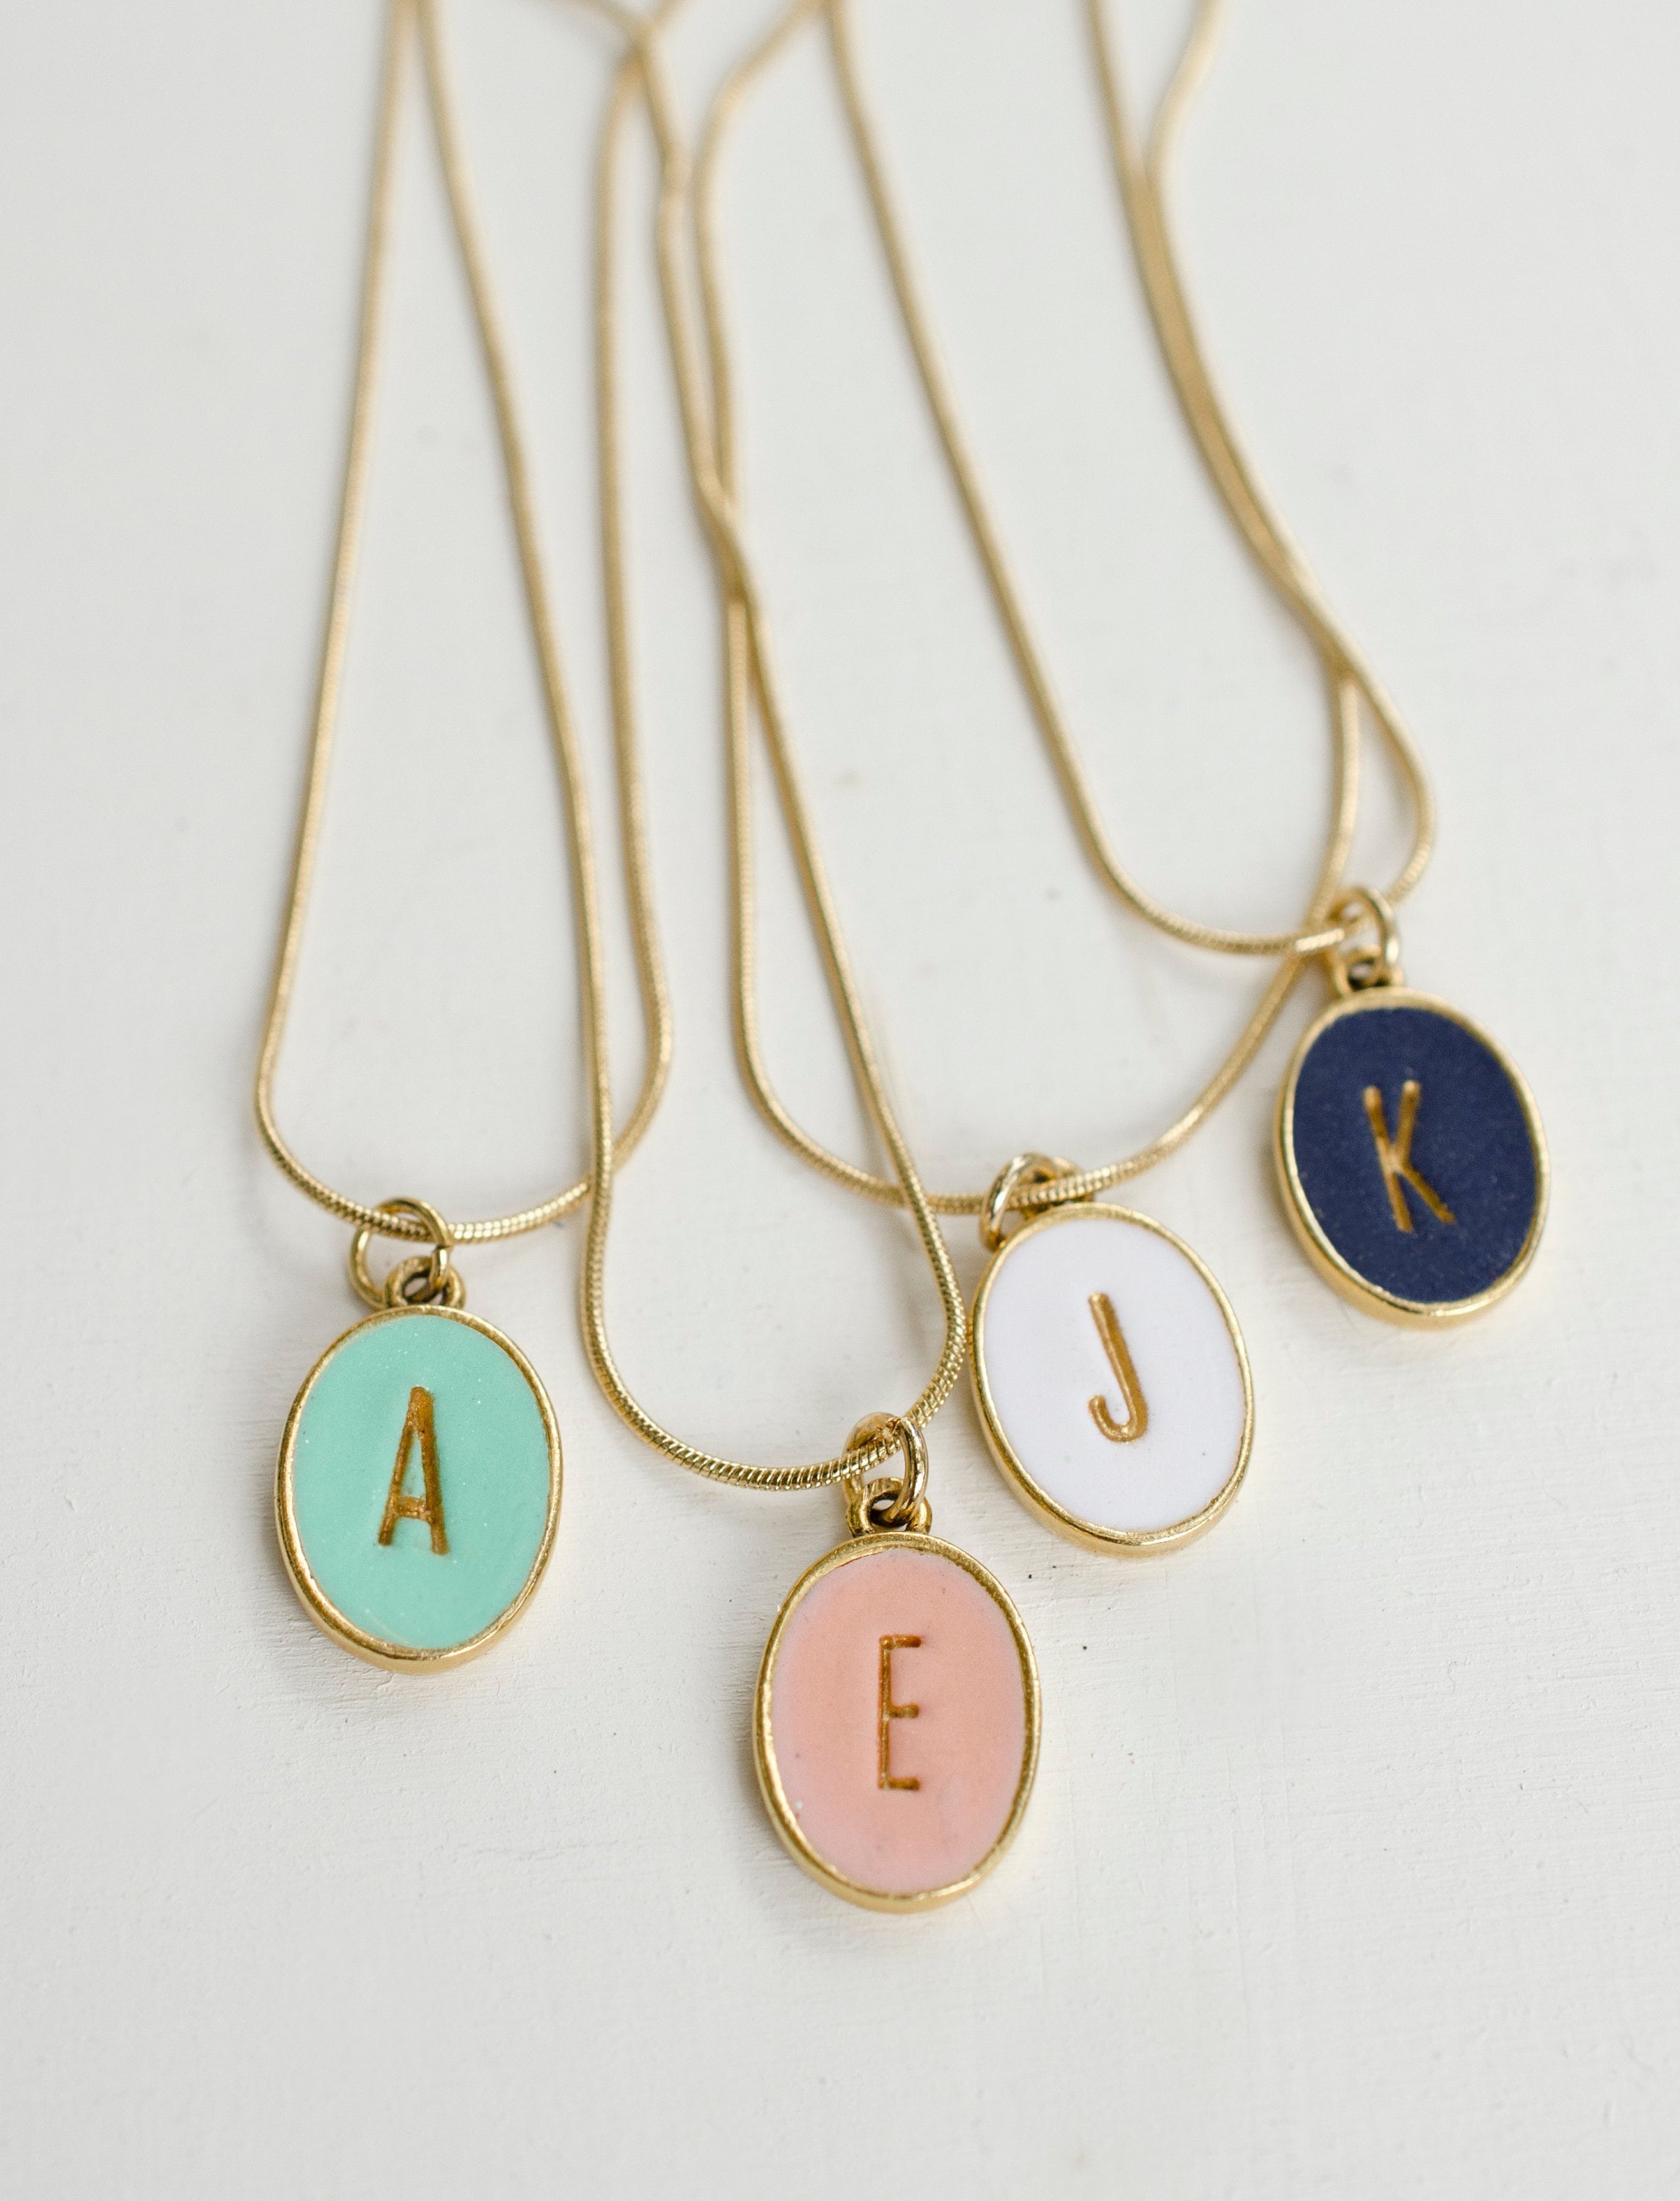 Oval shape initial charm, Letter necklace with diamond - Elegant Jewel Box